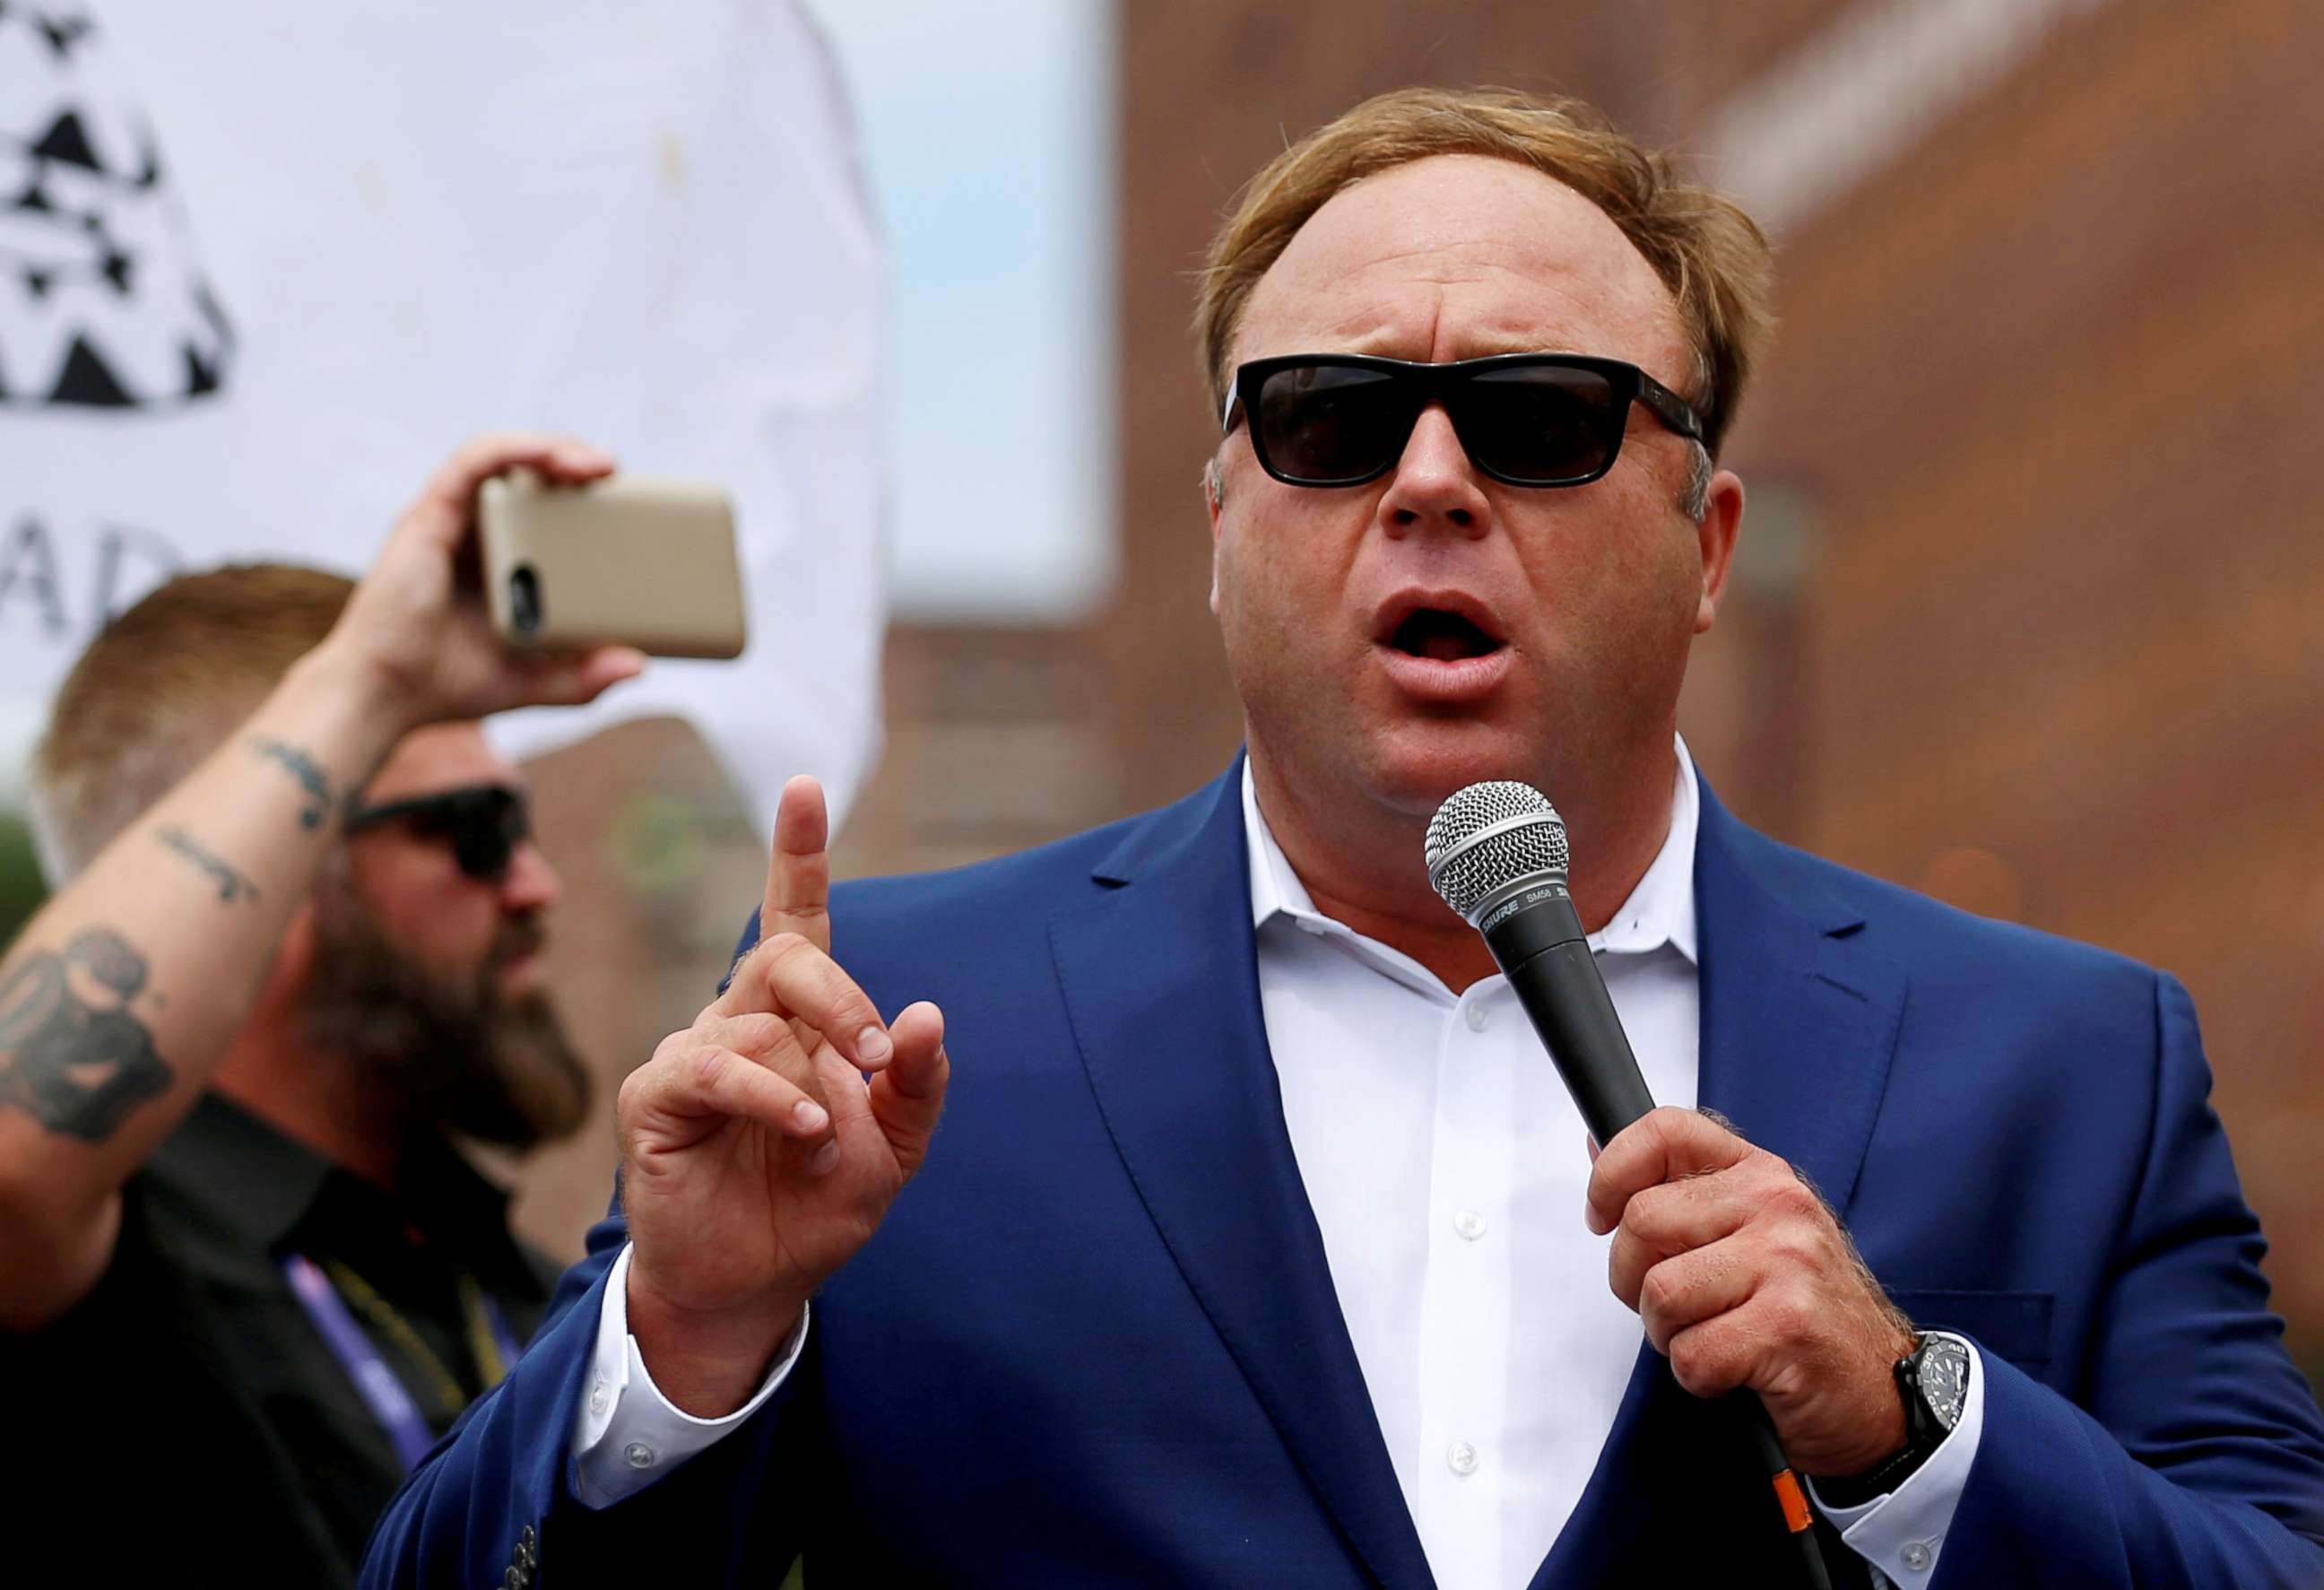 PHOTO: In this file photo, Alex Jones from Infowars.com speaks during a rally in support of Republican presidential candidate Donald Trump near the Republican National Convention in Cleveland, Ohio, July 18, 2016.